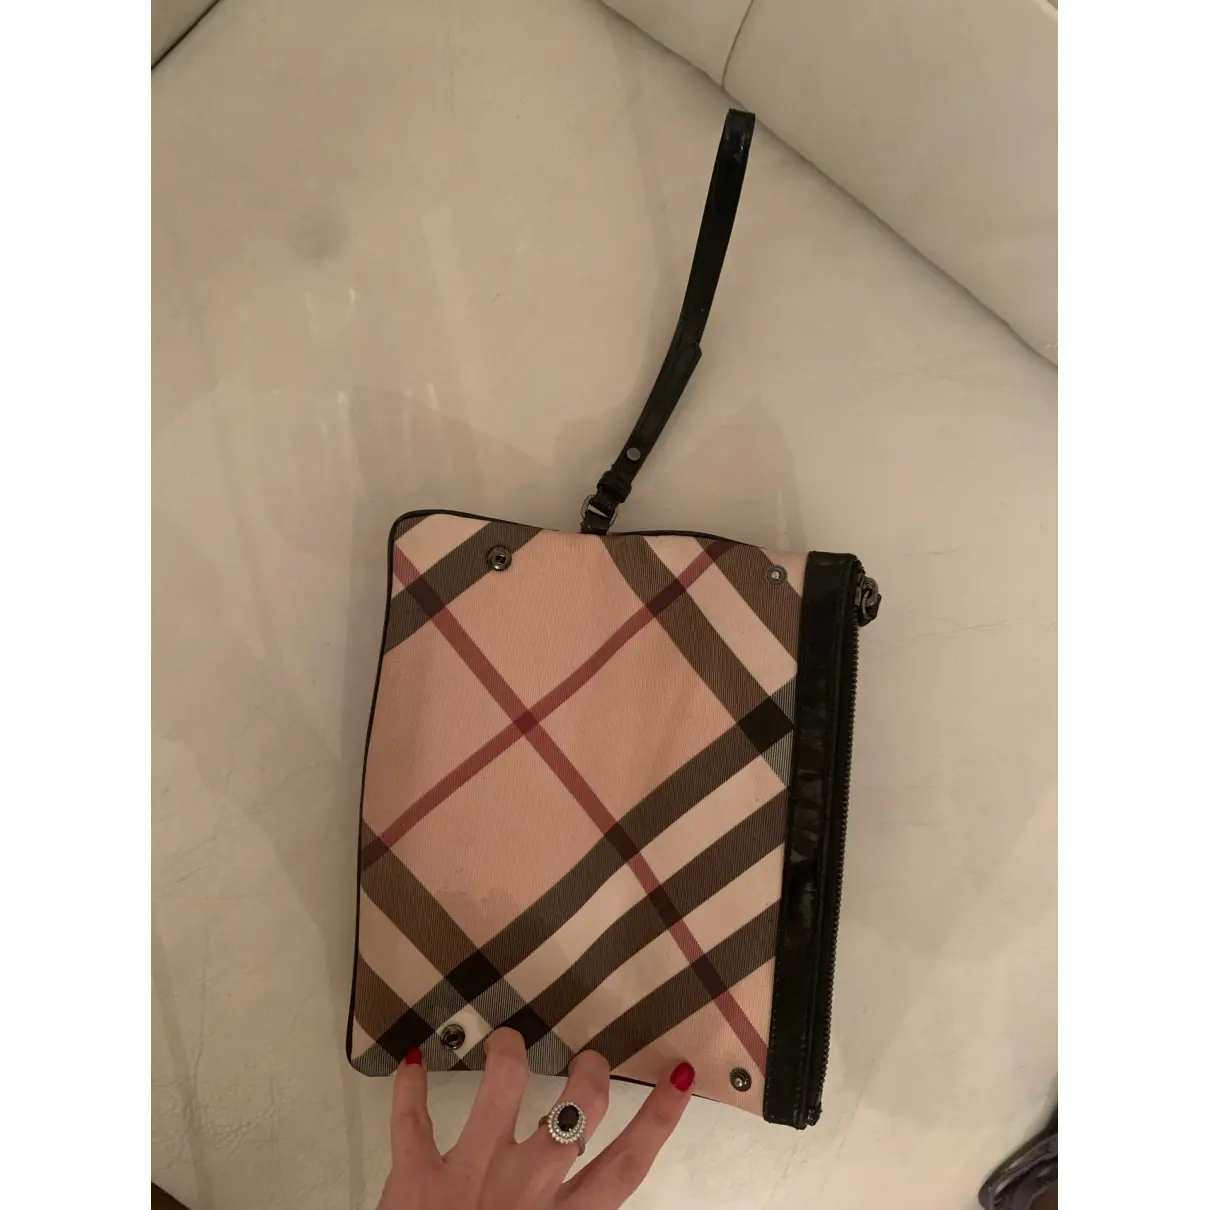 Buy Burberry Leather clutch bag online